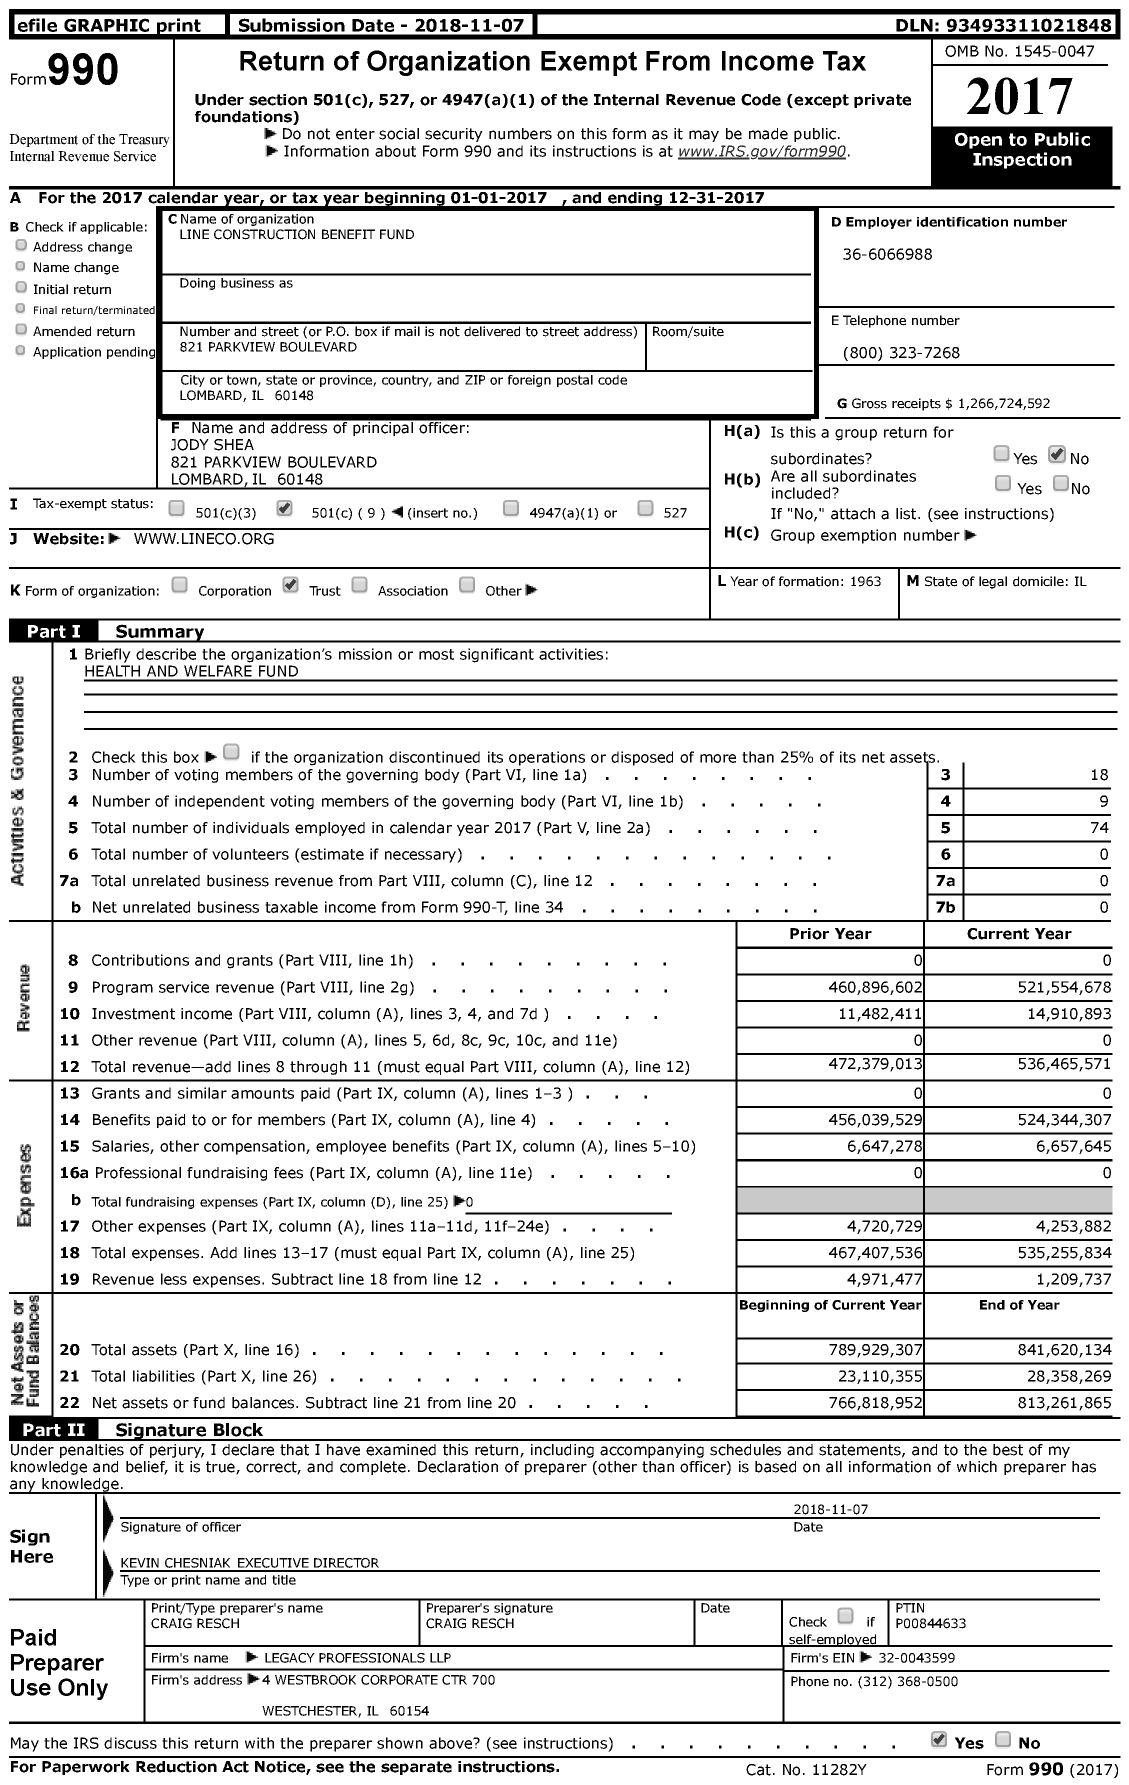 Image of first page of 2017 Form 990 for Line Construction Benefit Fund